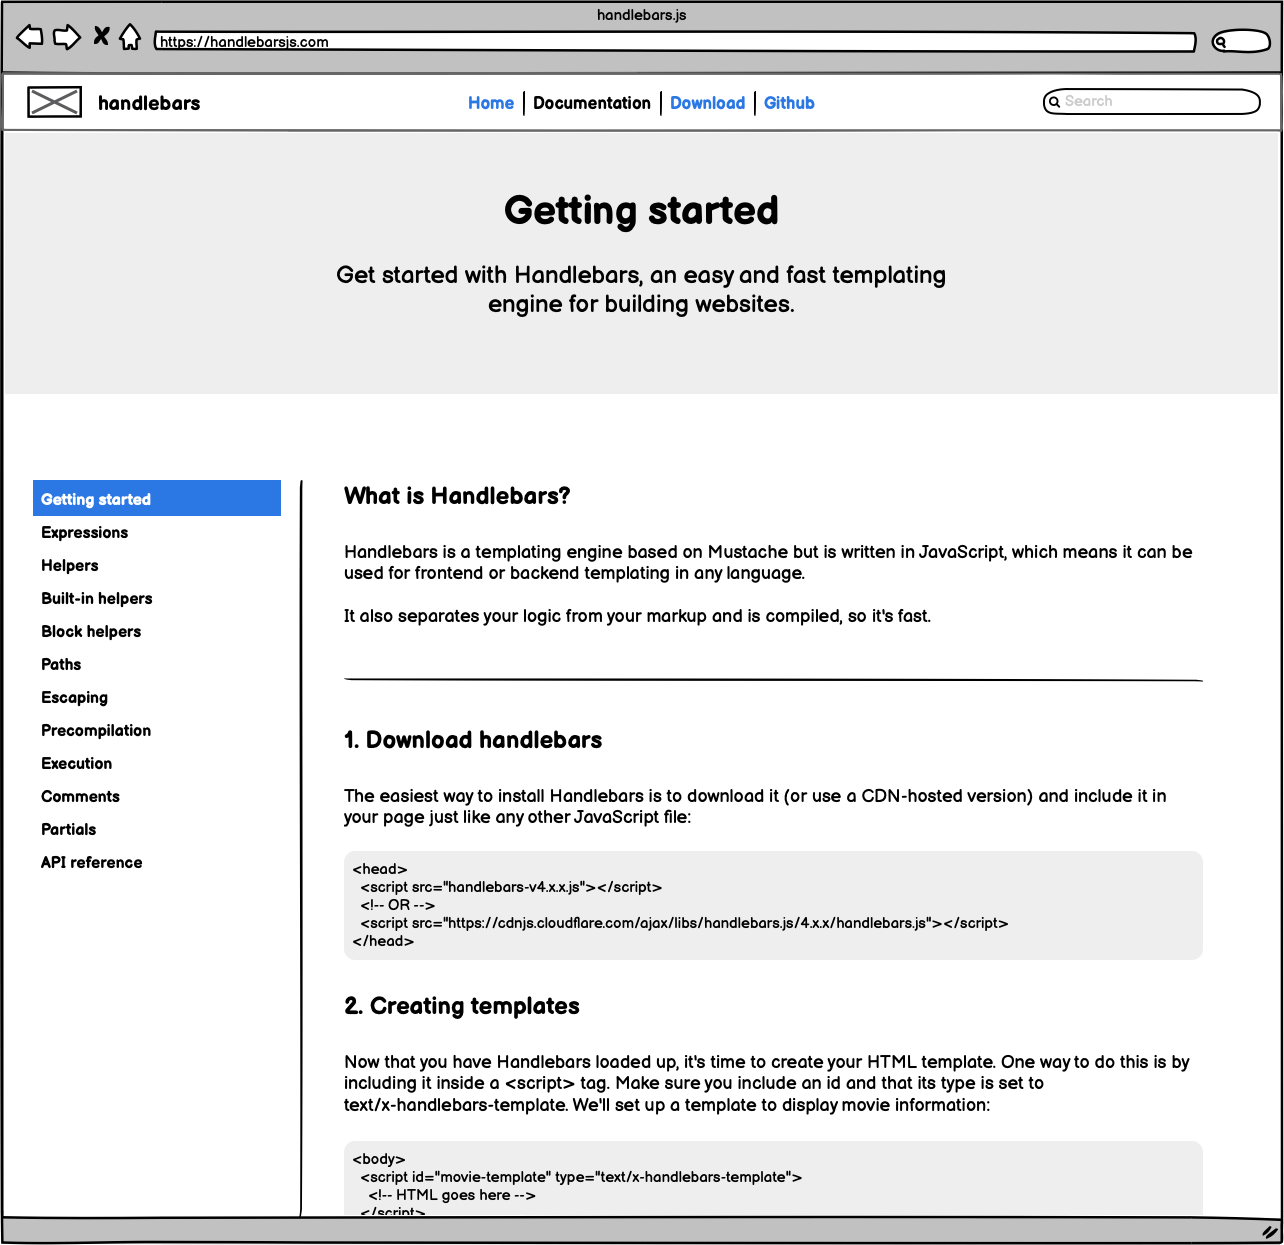 Wireframe of getting started page